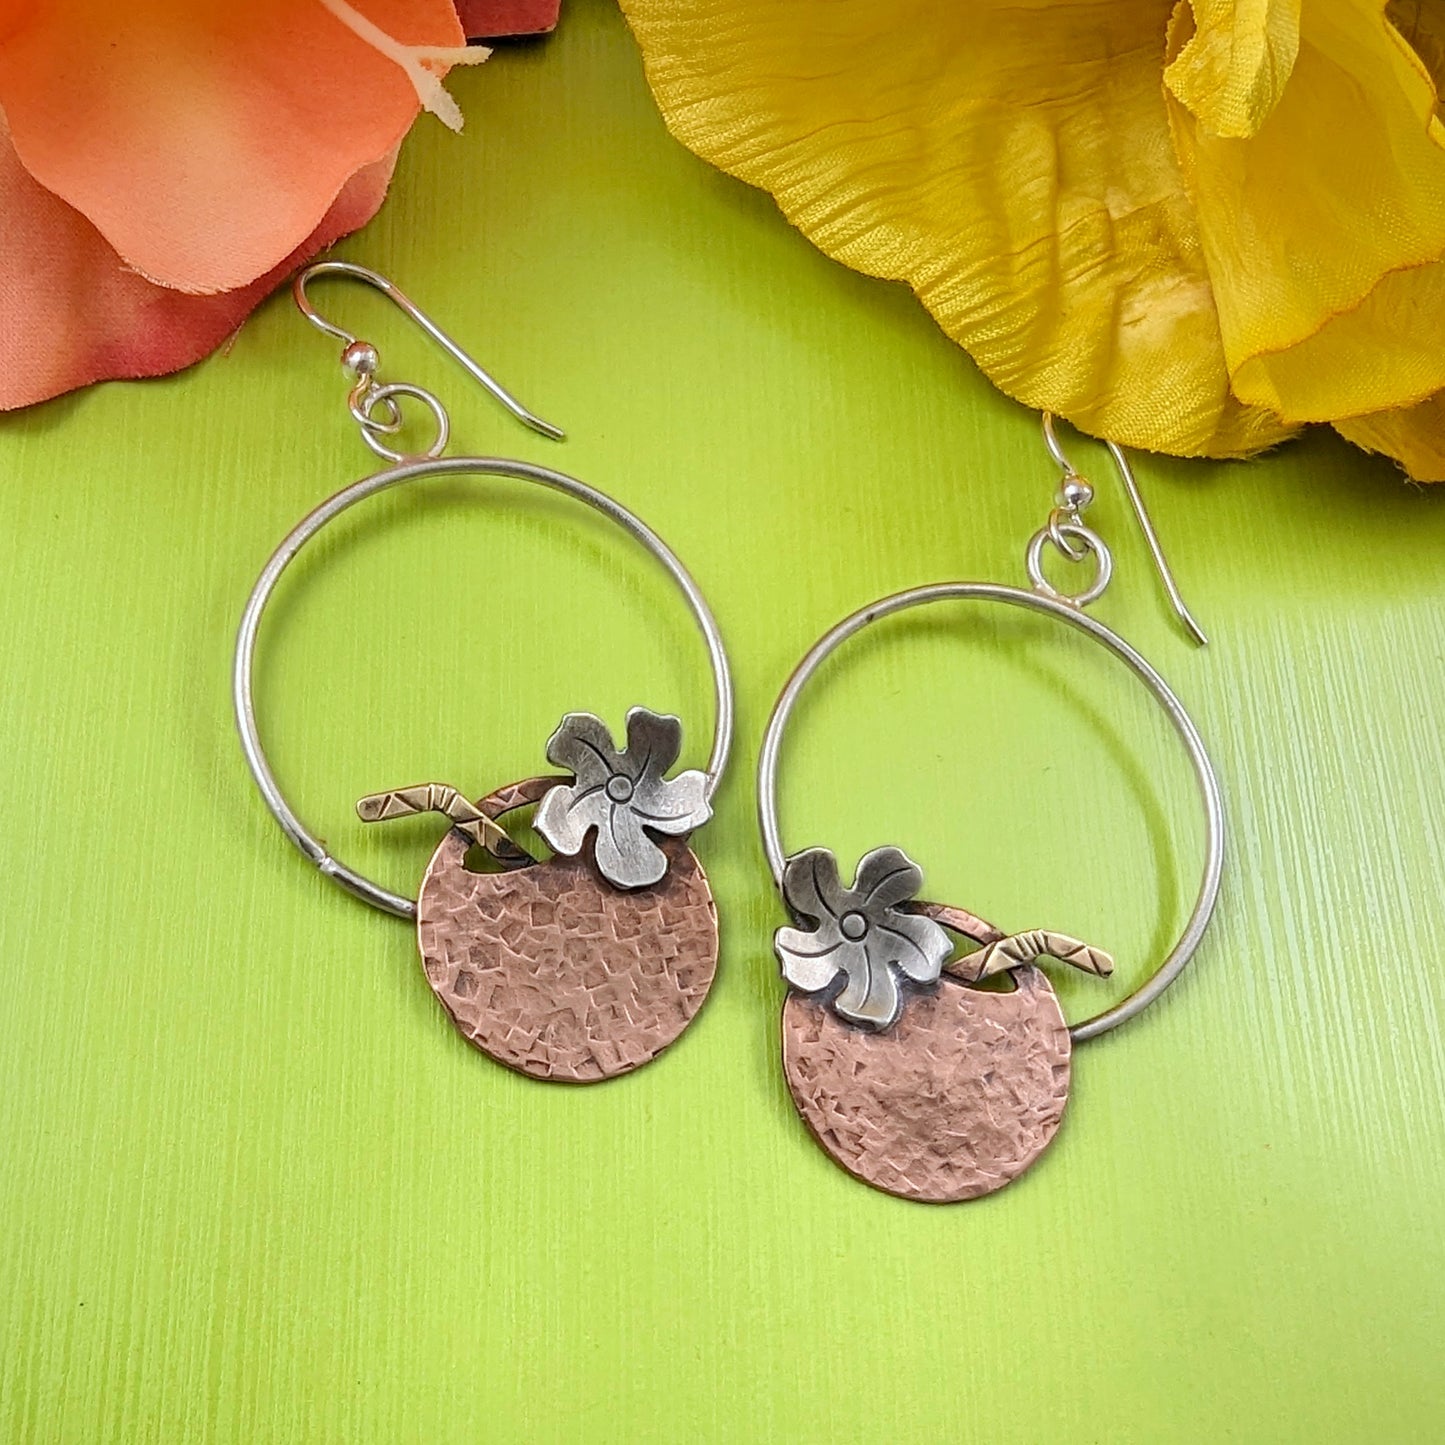 Hammered copper coconut earrings on green background